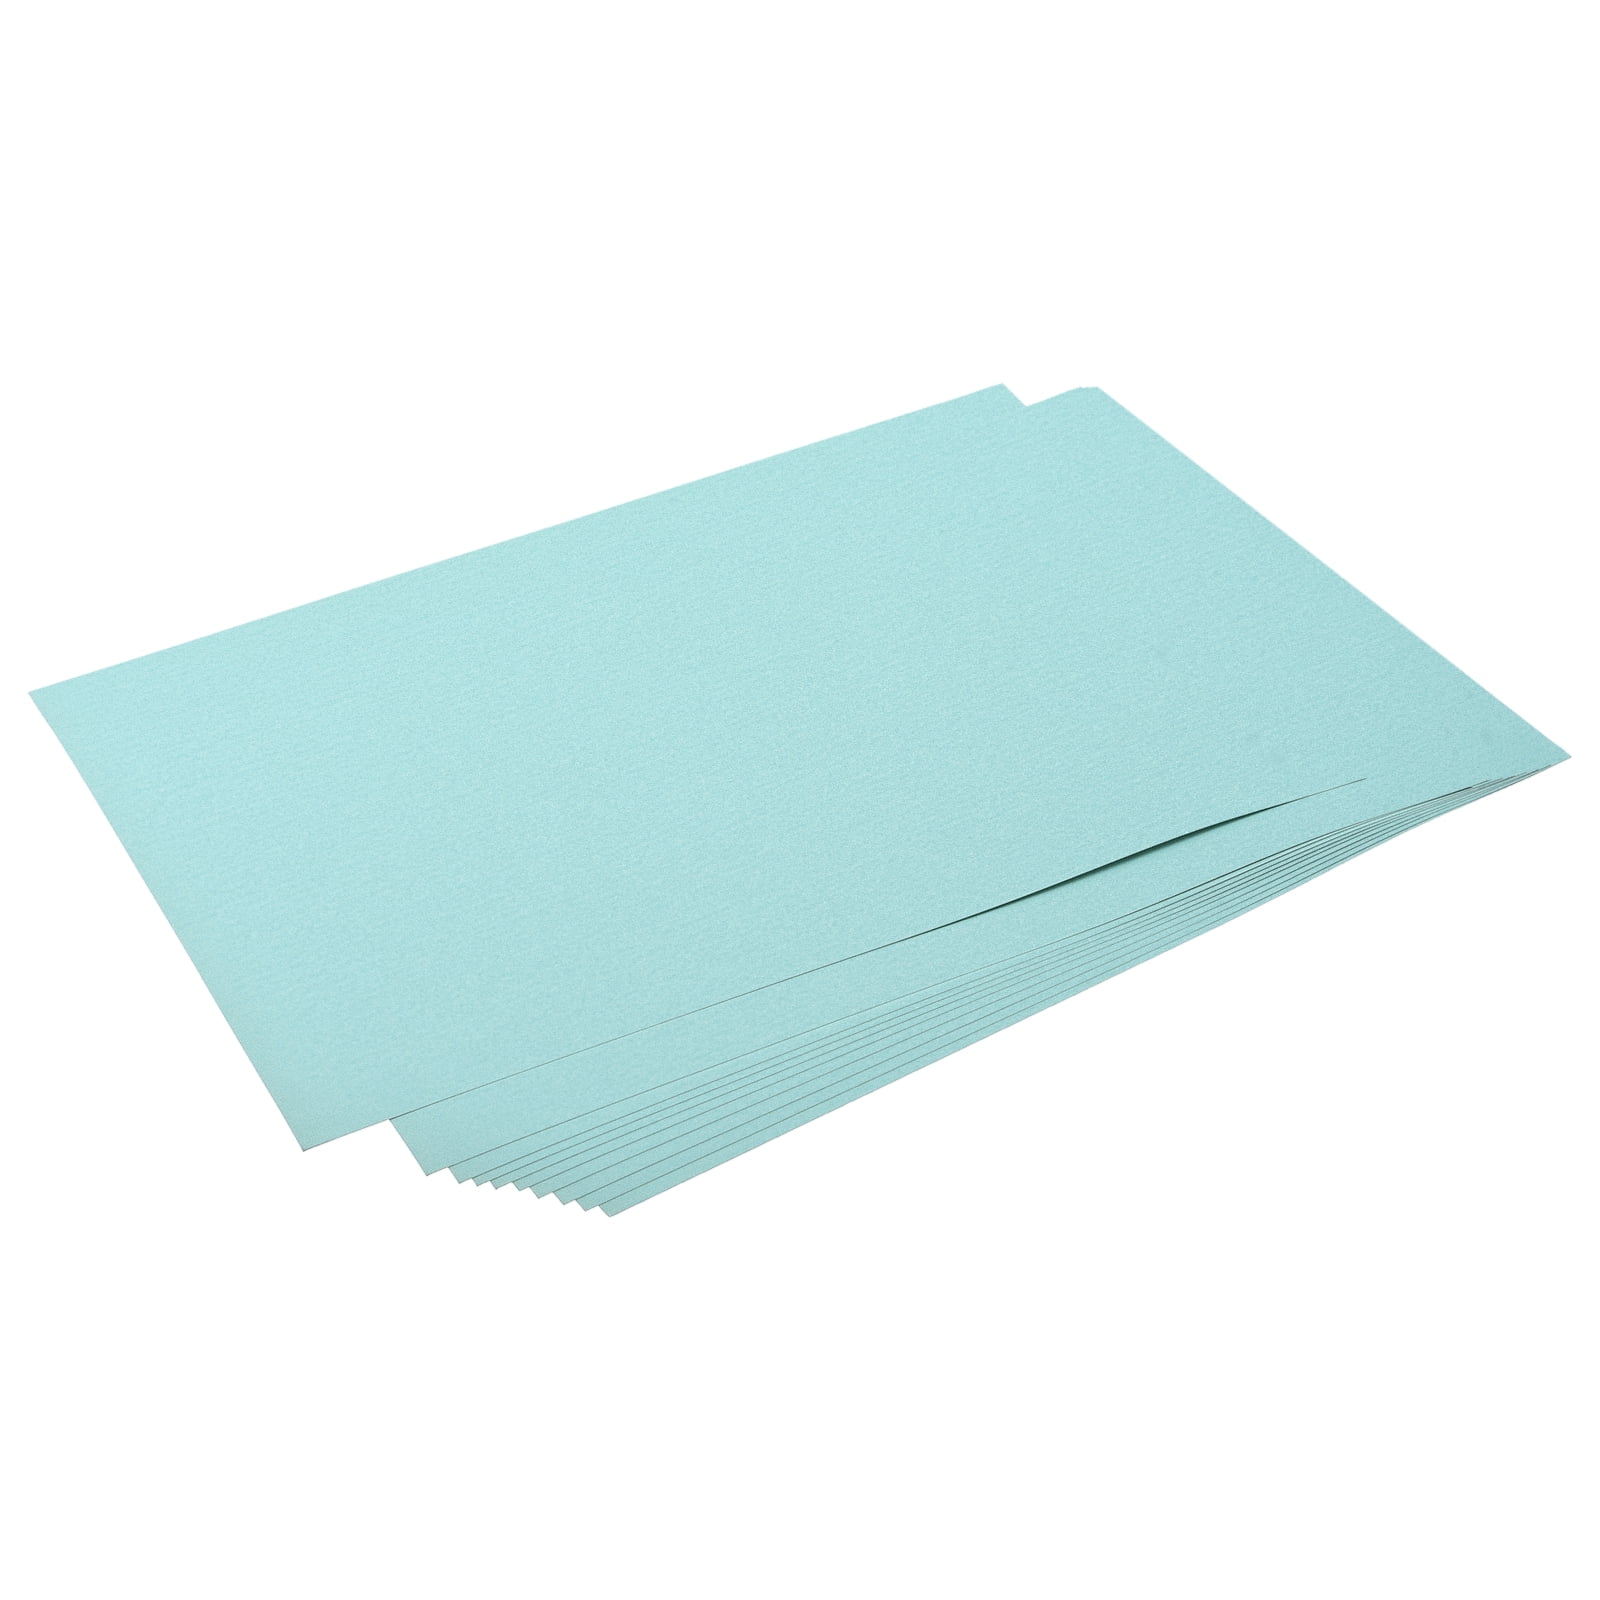 Uxcell Shimmer Cardstock Paper 50 Sheets, 8x11.5 Inch 92 Lb/250gsm